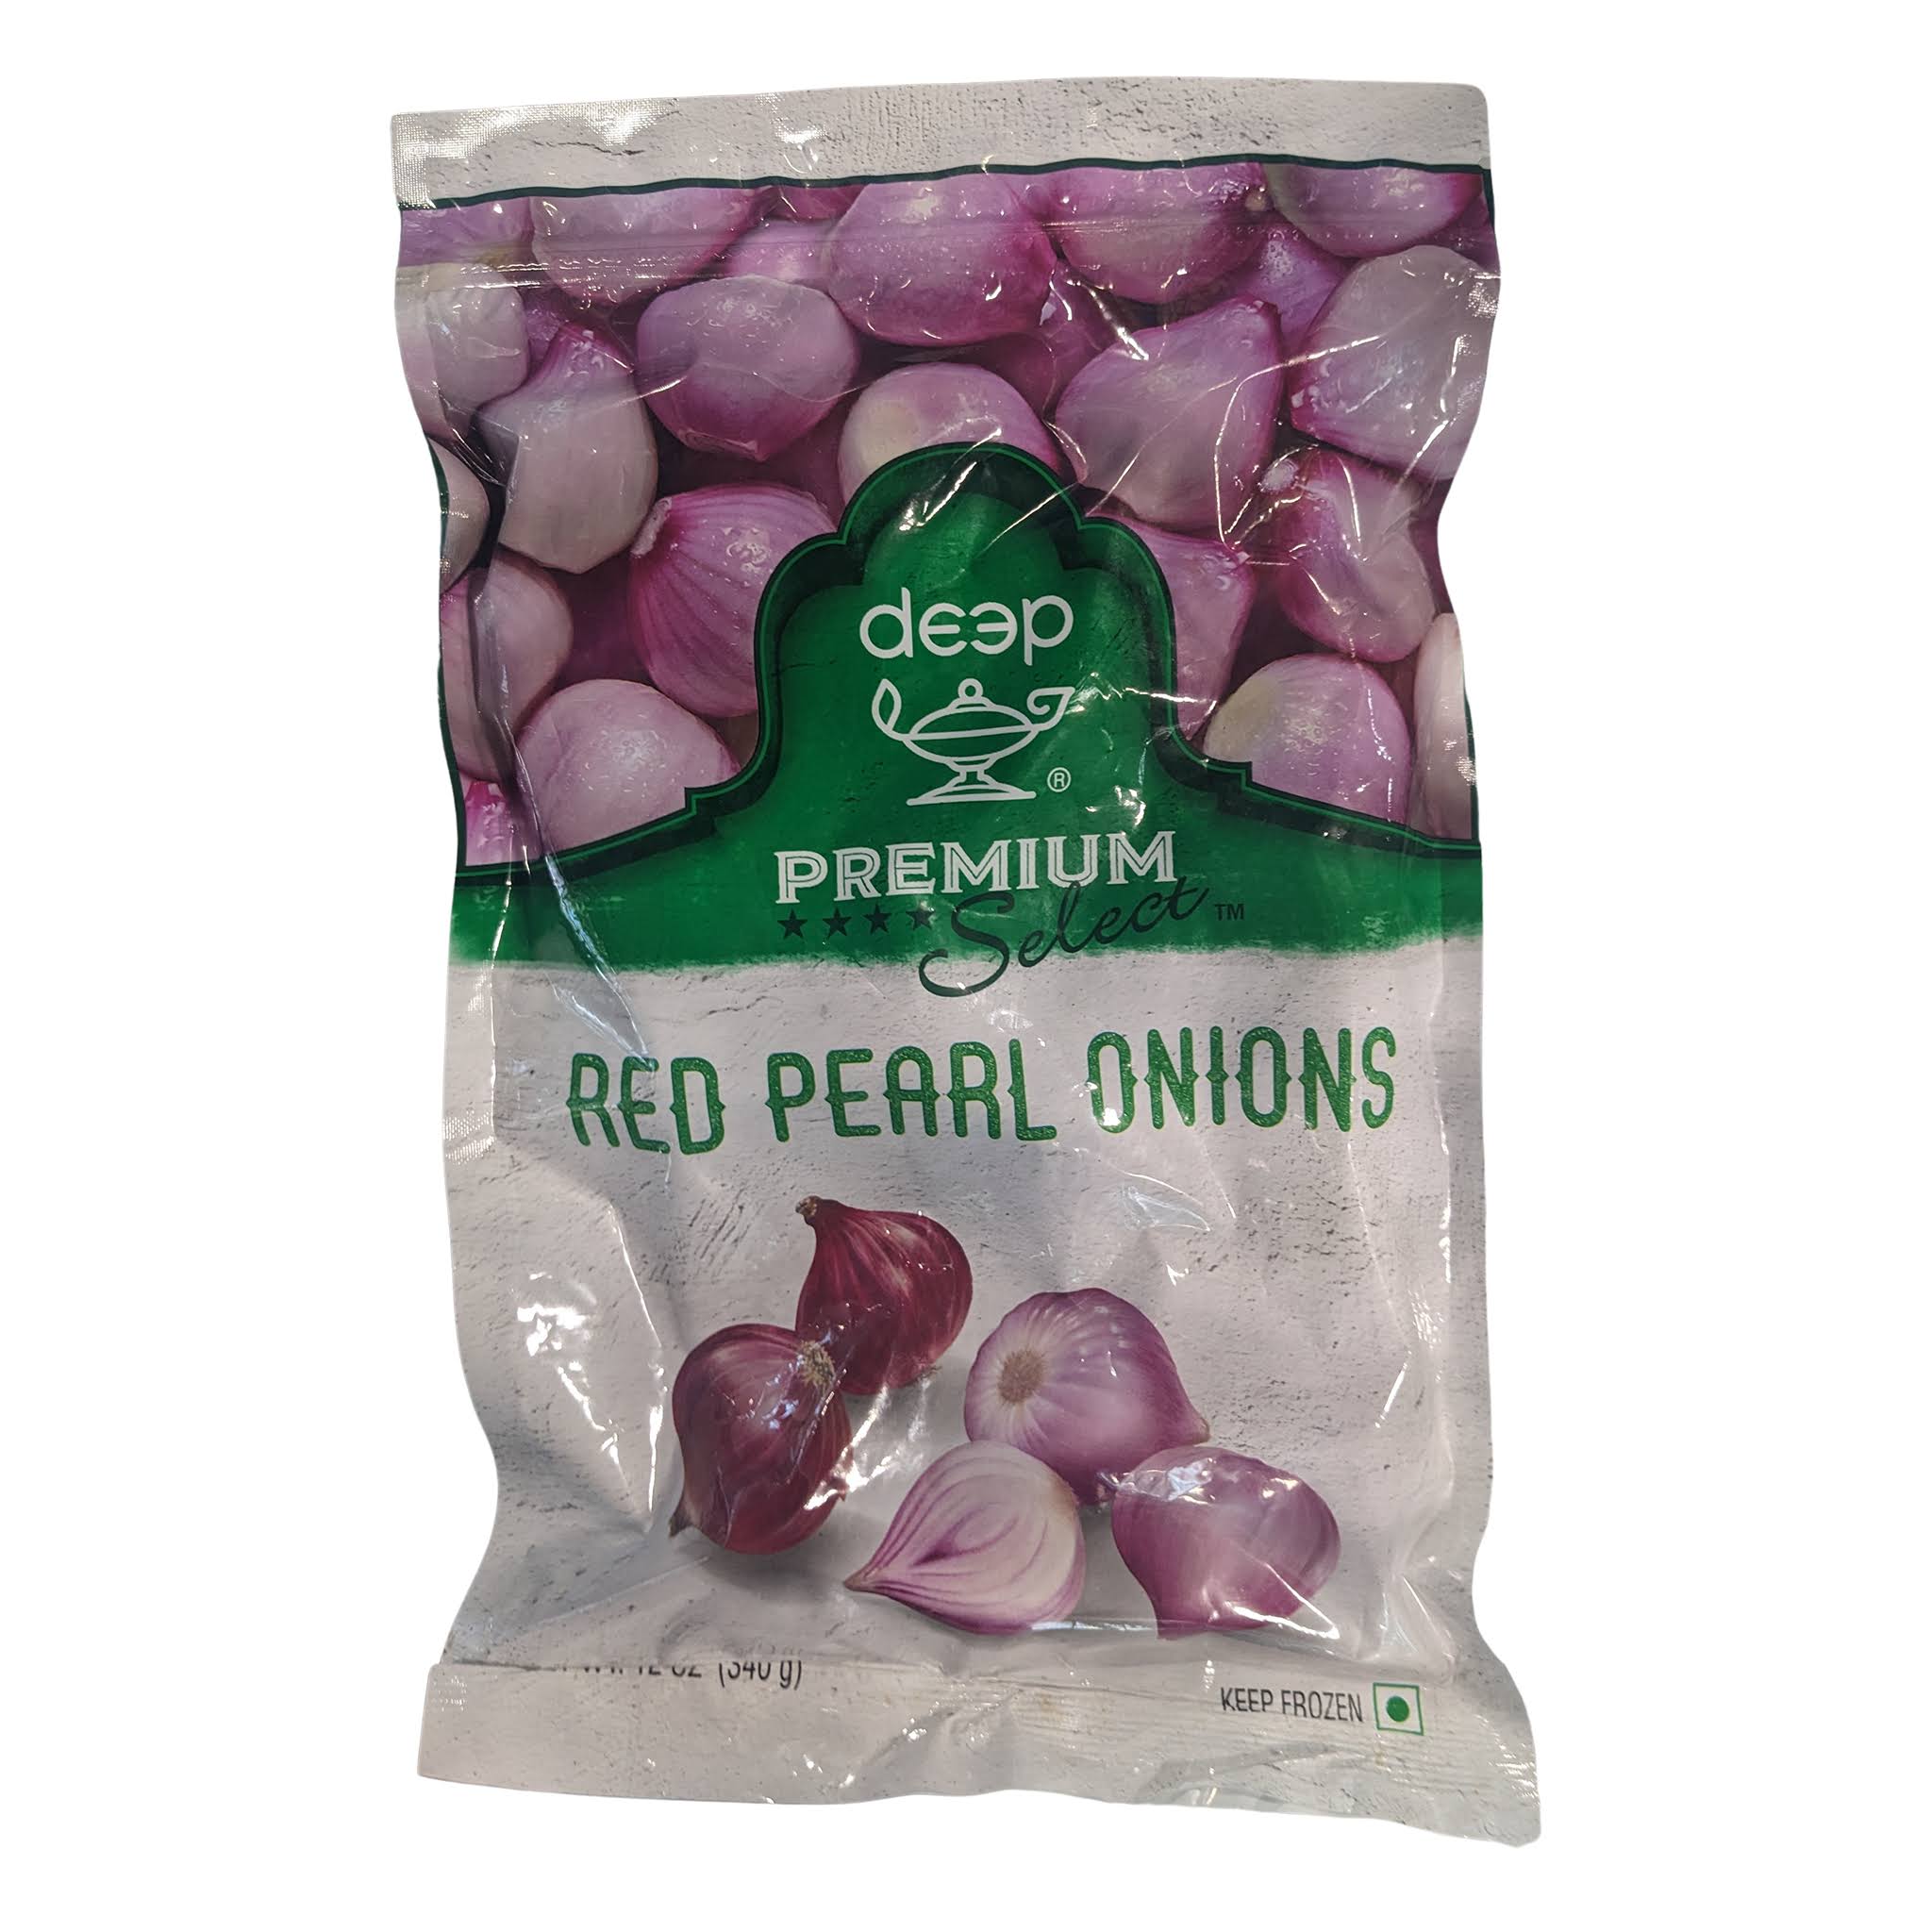 Deep Frozen Red Pearl Onions - 340g